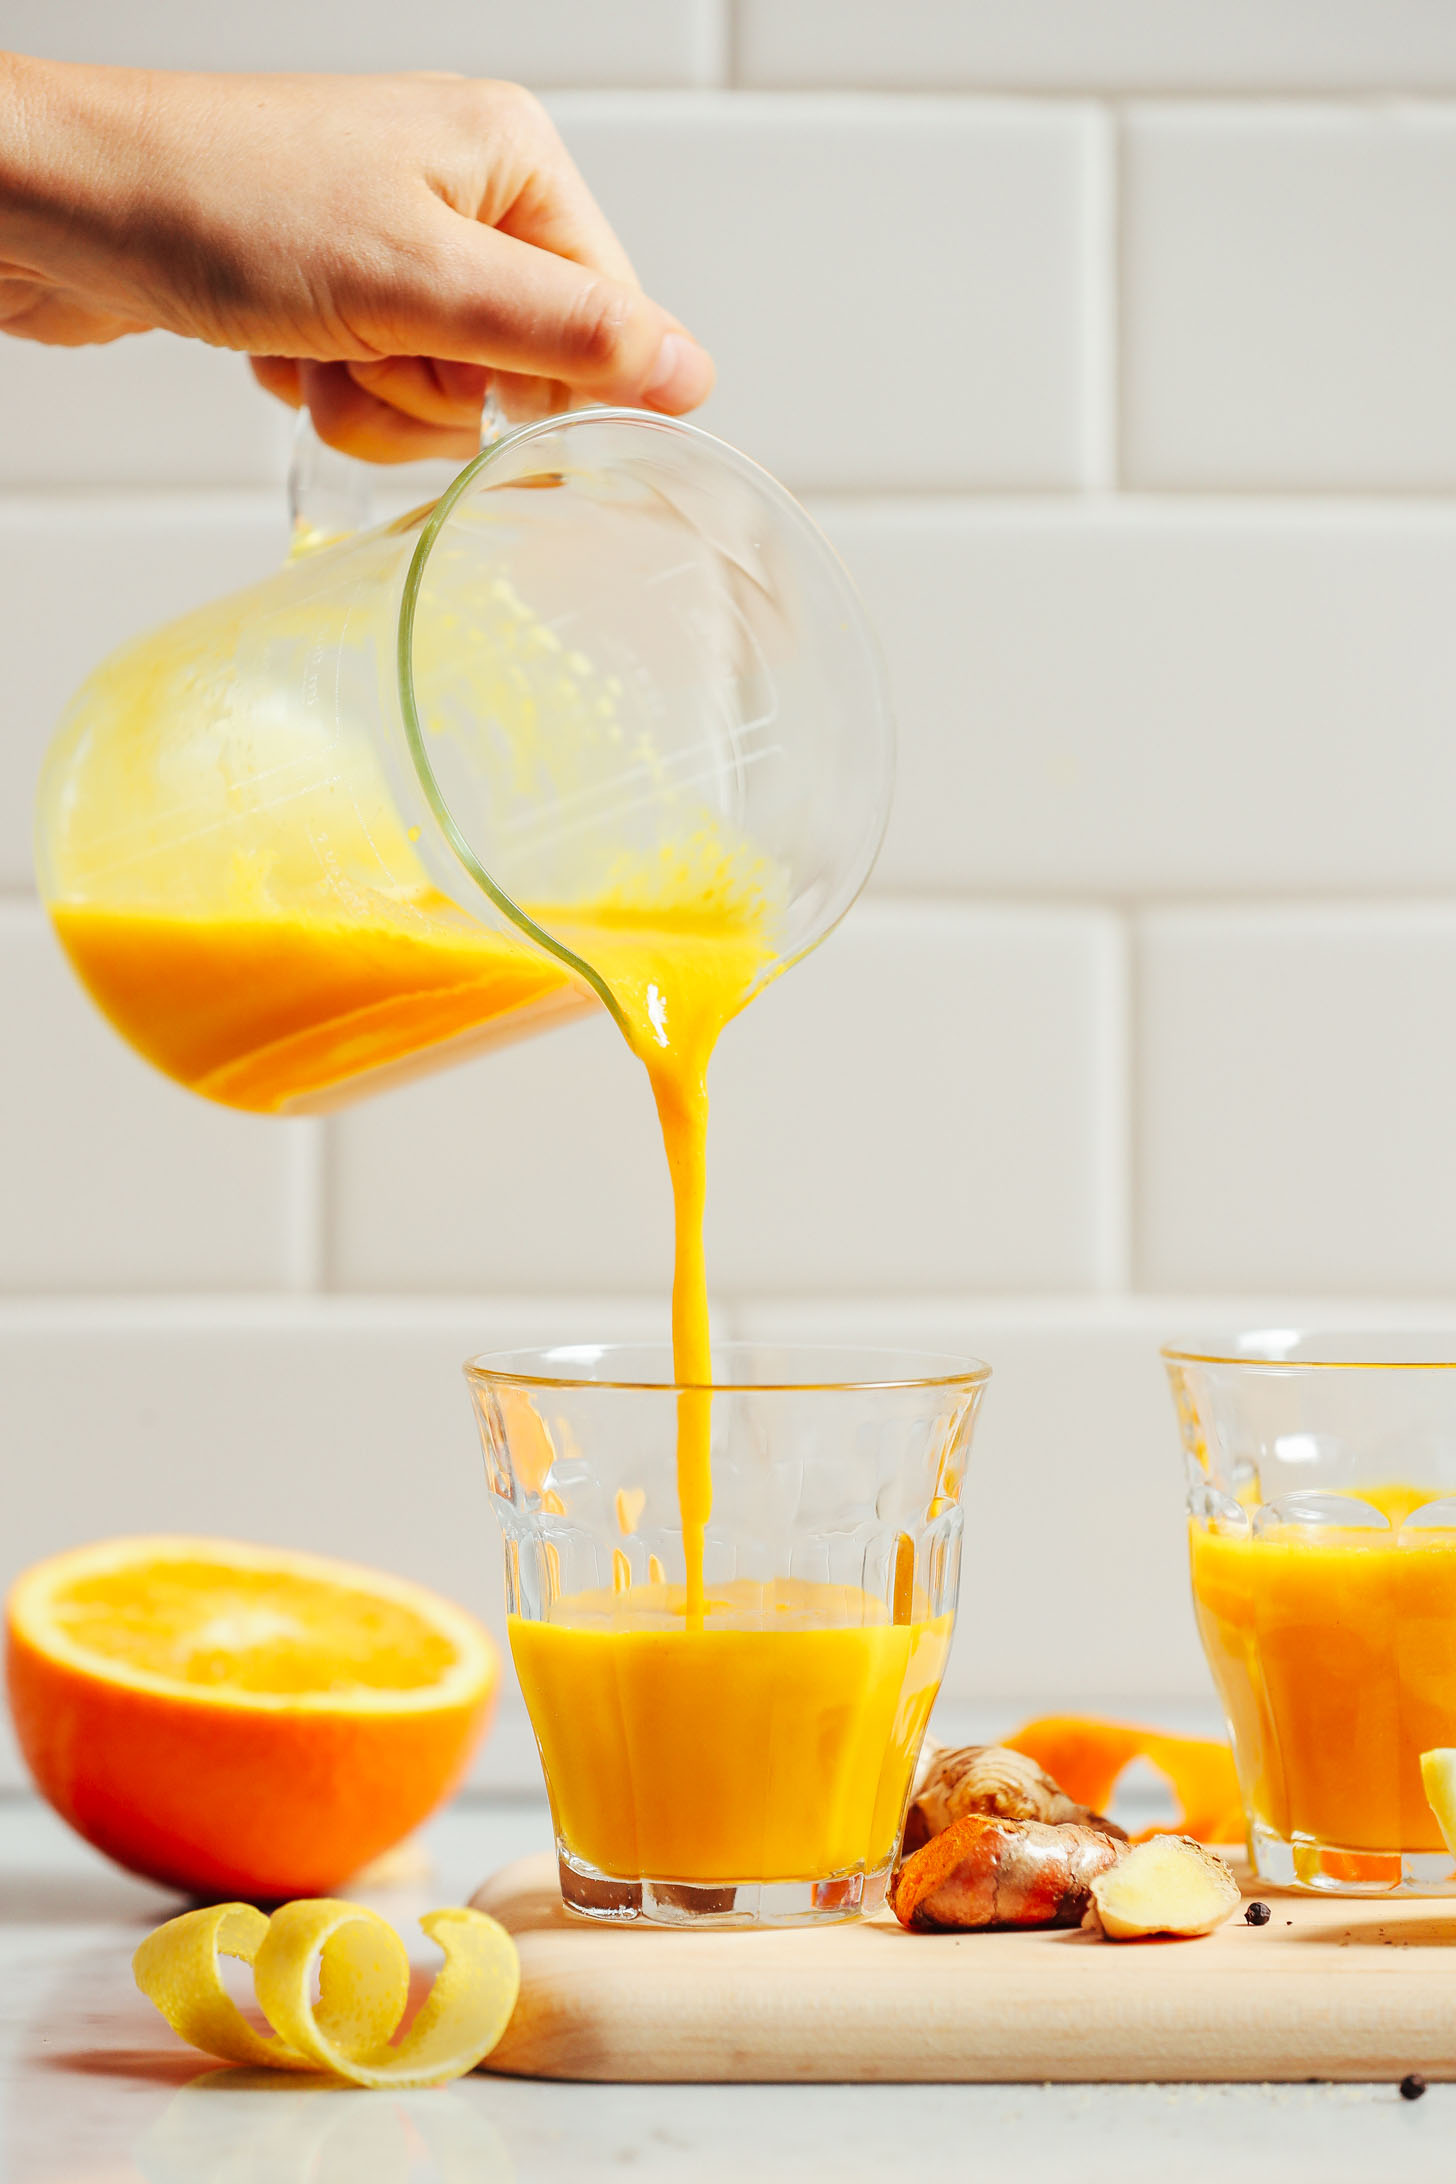 Pouring a batch of our Turmeric Wellness Shots recipe from a measuring glass into drinking glasses